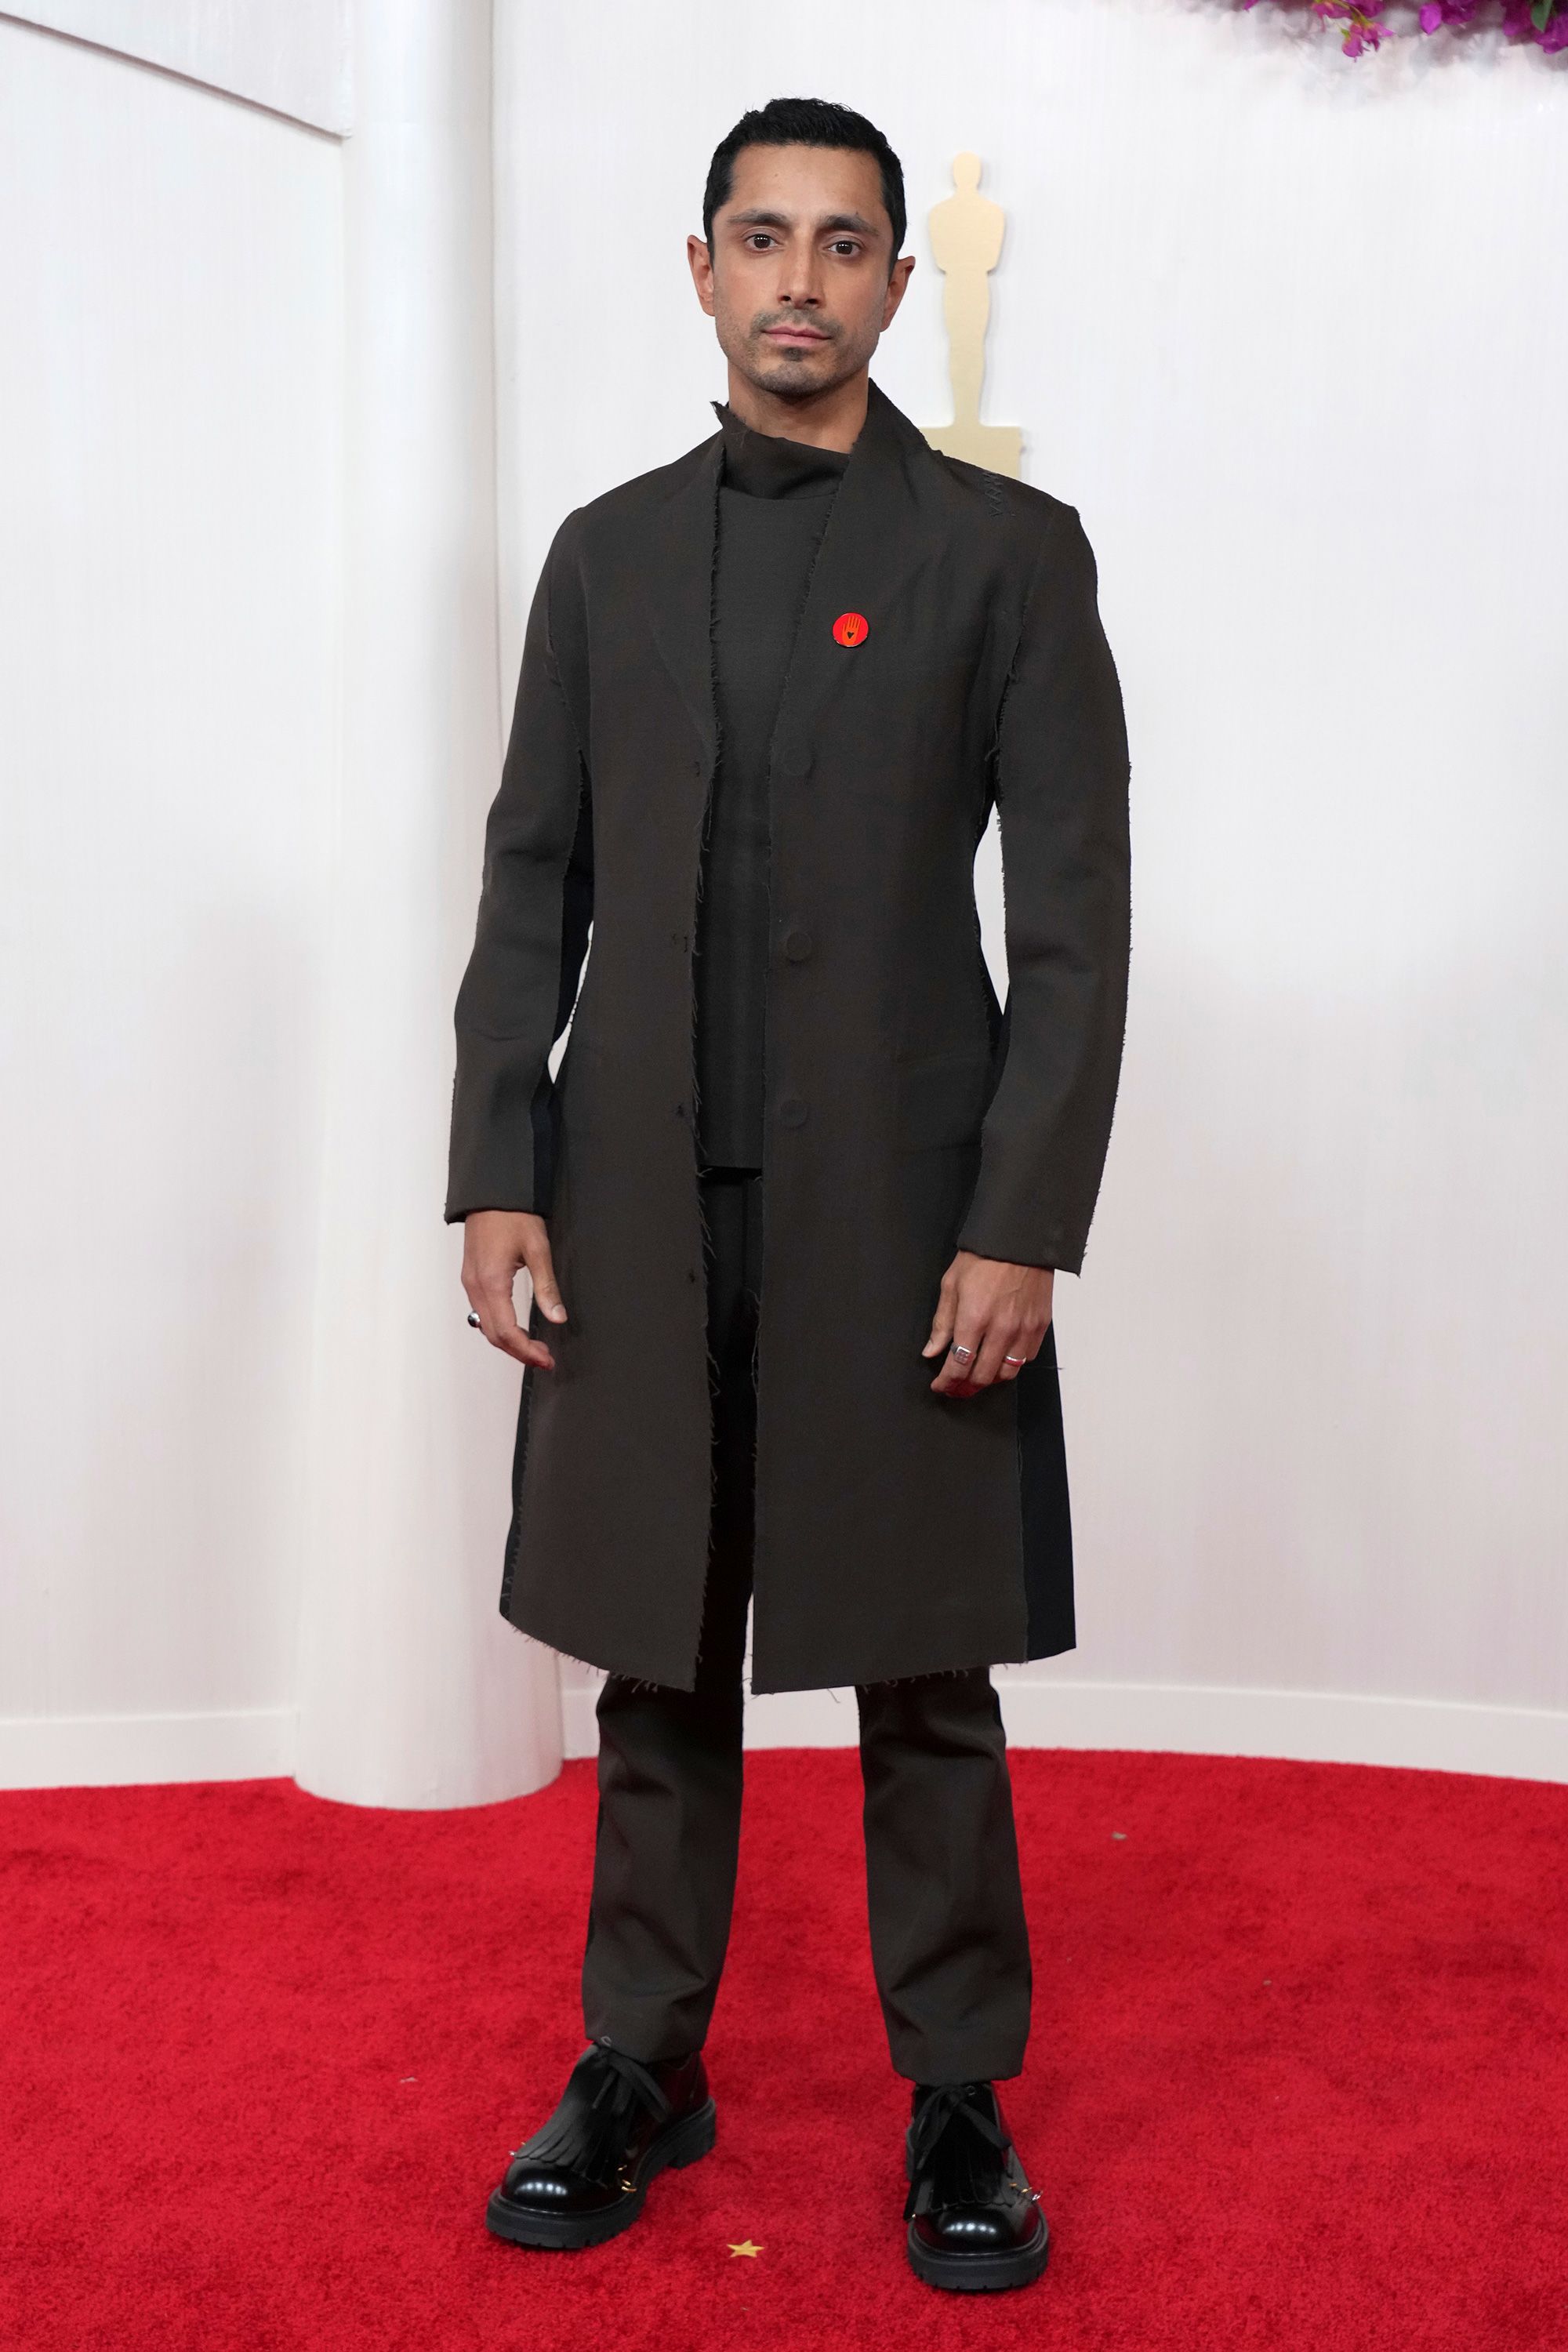 Riz Ahmed arrived wearing a black set designed by Marni that included a knee-length coat.